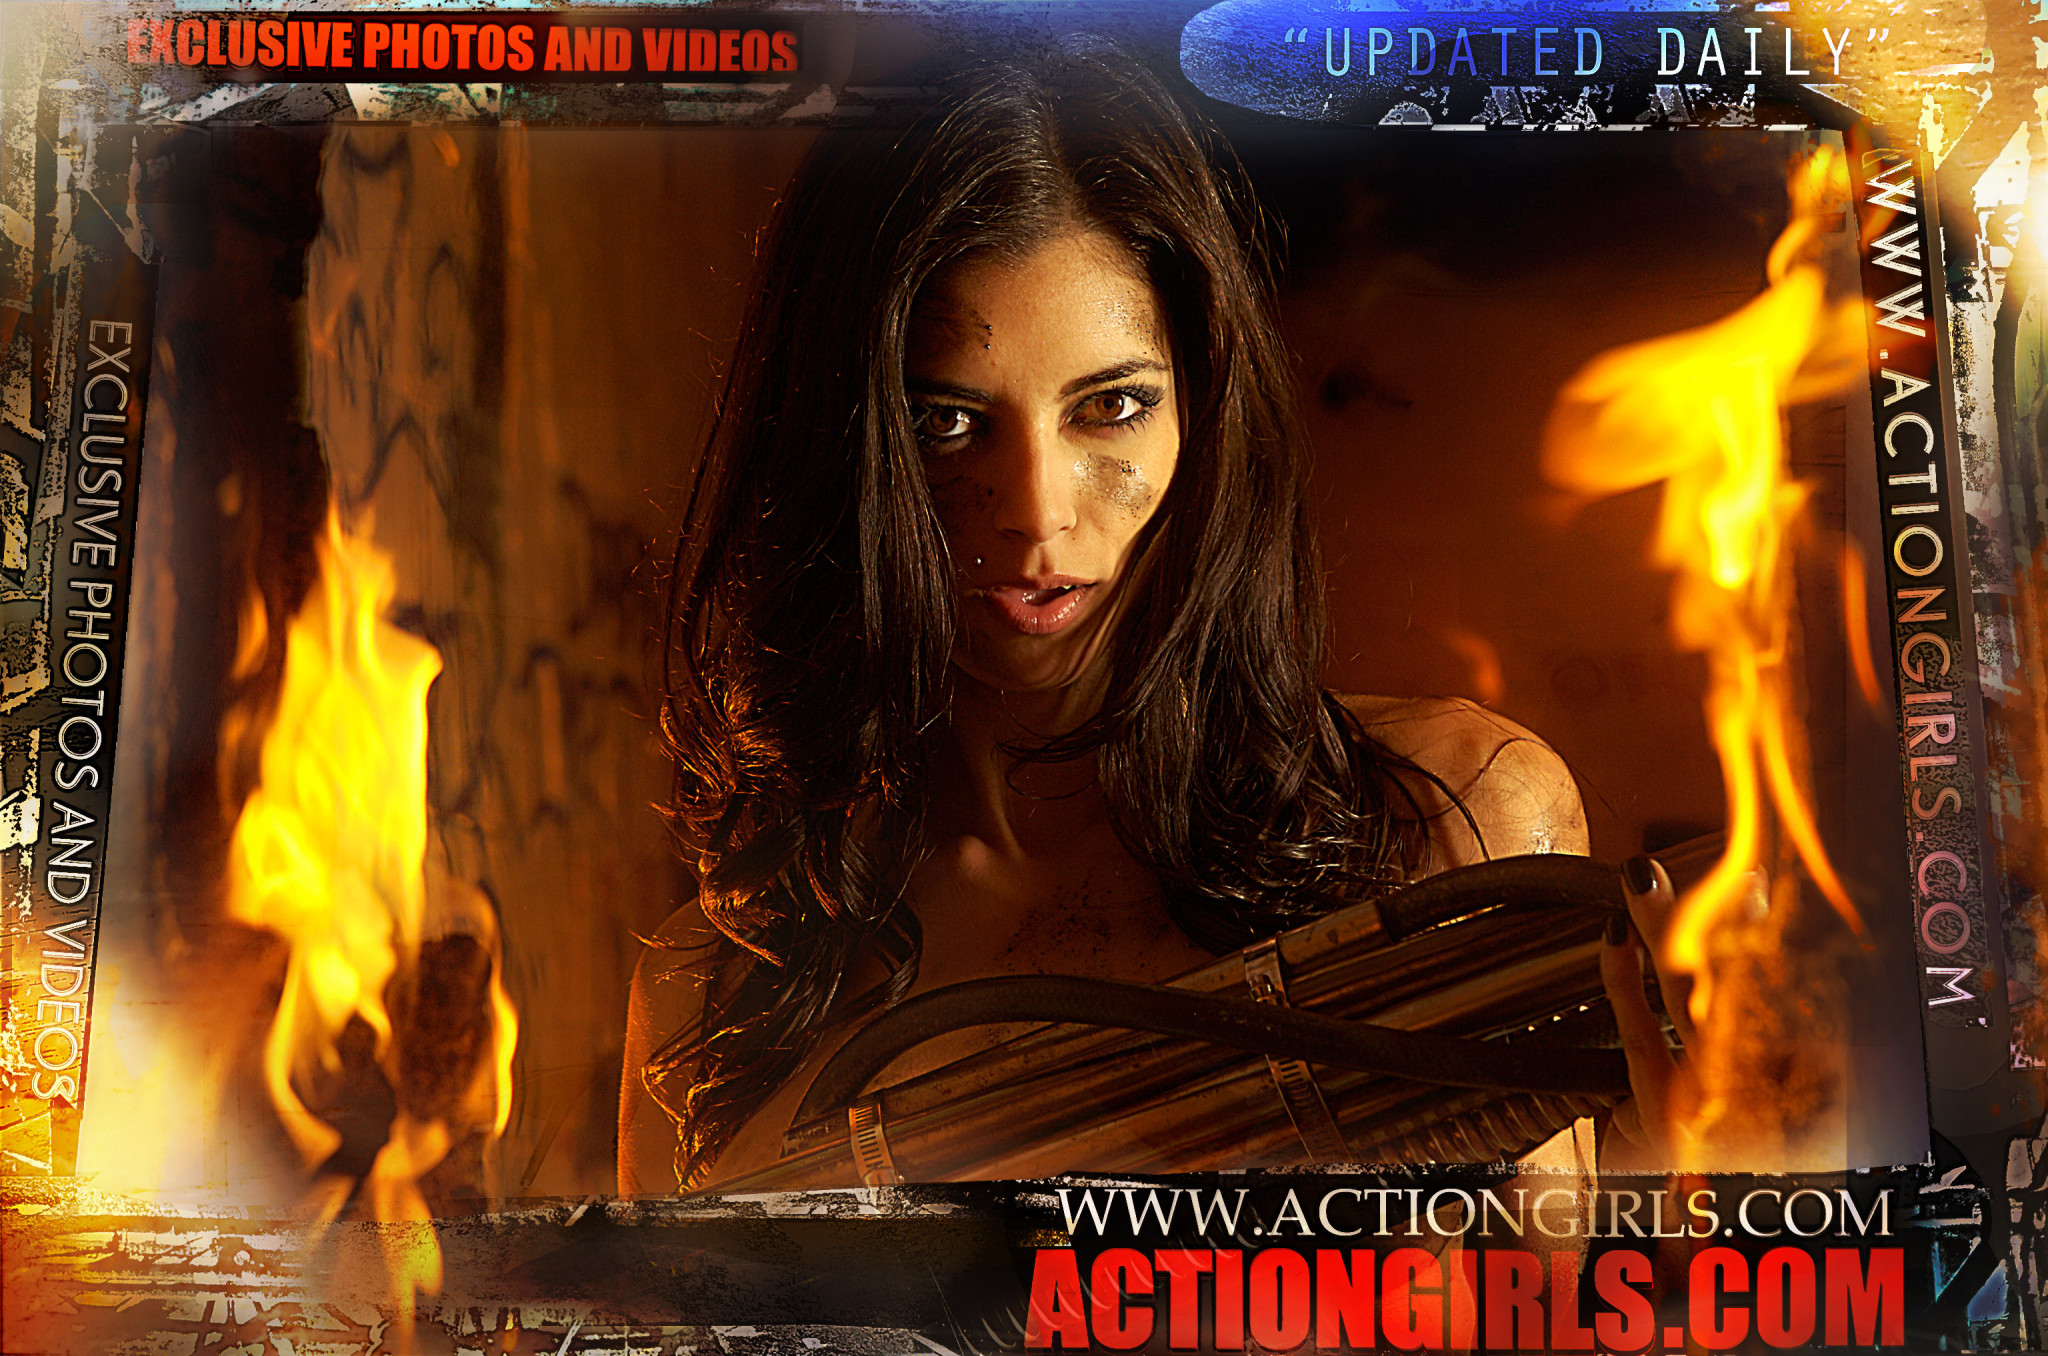 Exclusive Actiongirls Web Posters Deluxe Ser 5 Photos Actiongirl #70962400